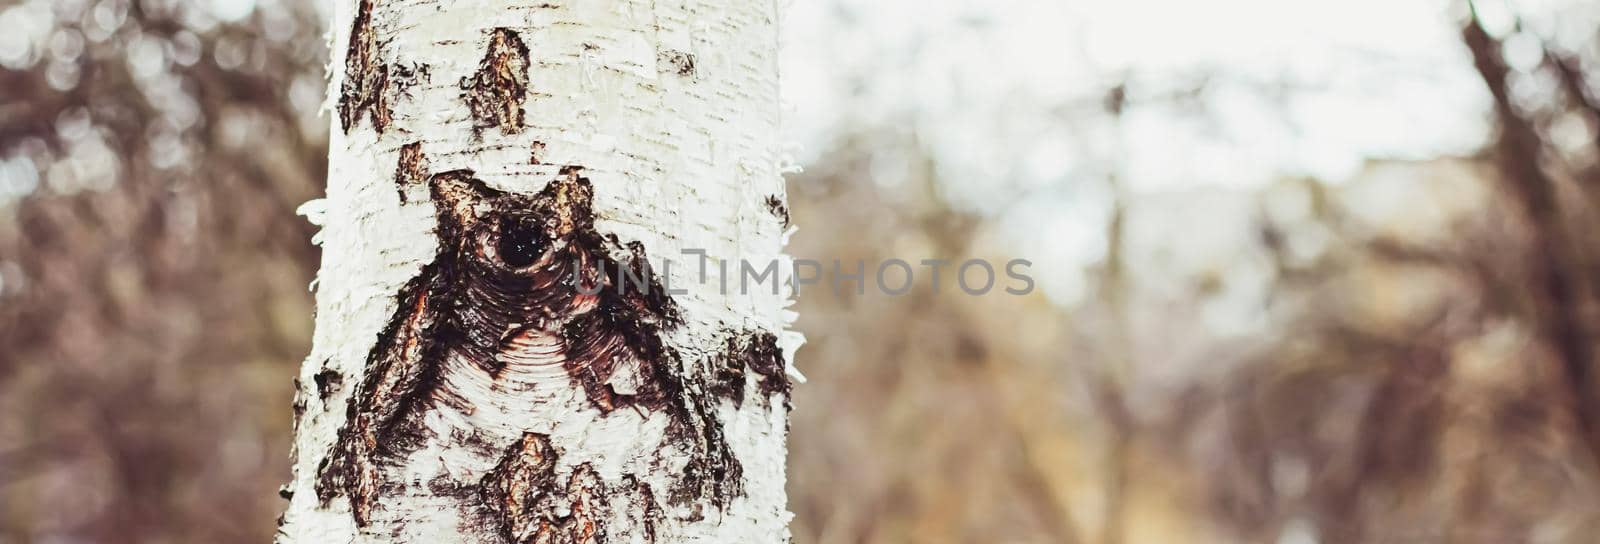 Natural wood, birch tree texture as wooden background, environment and nature closeup